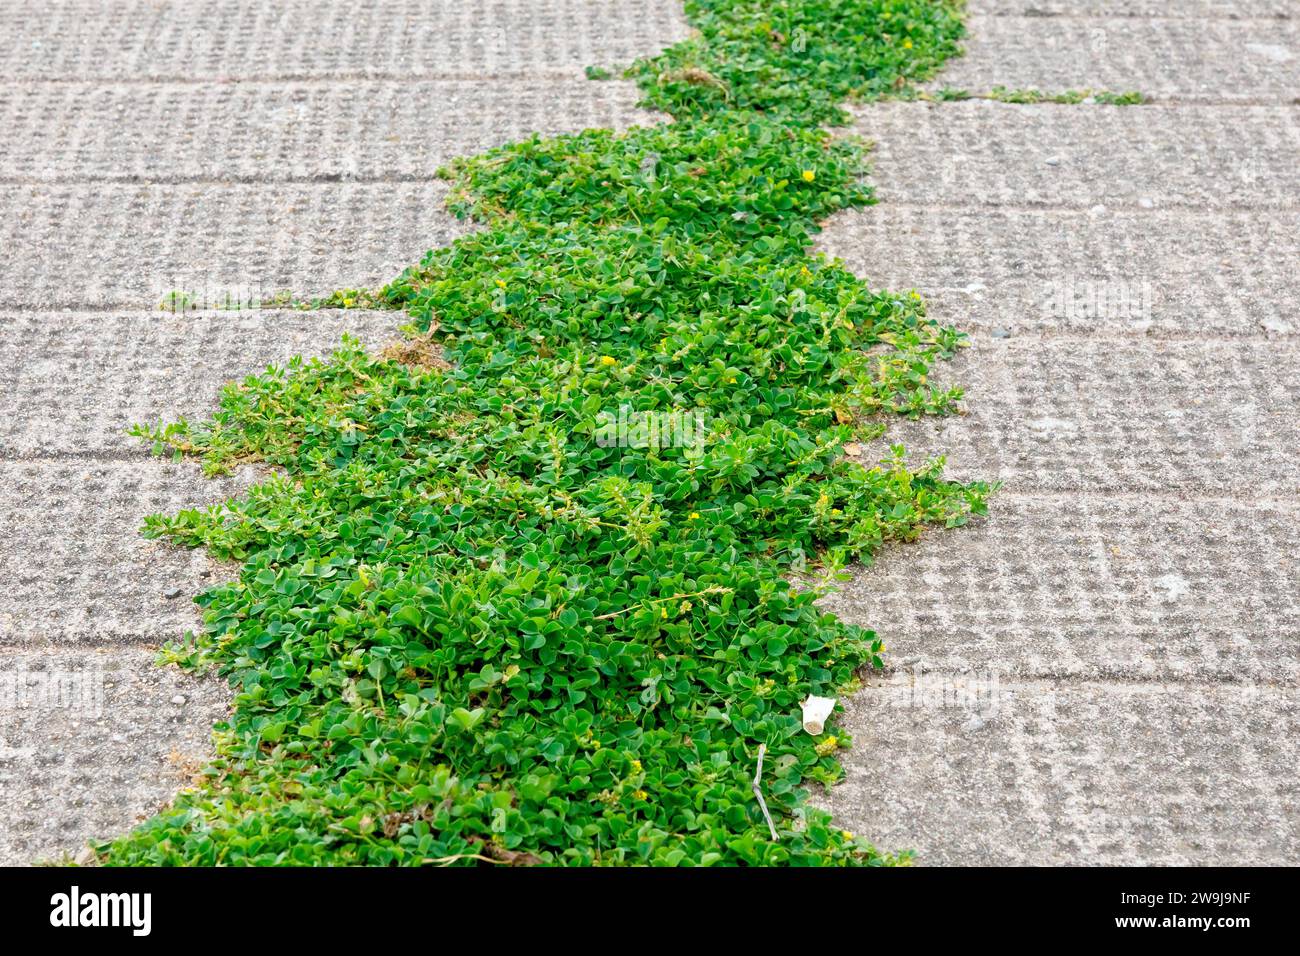 Close up a mass of mainly Black Medick (medicago lupulina) and Knotgrass (polygonum aviculare) growing along a crack in a concrete pavement. Stock Photo